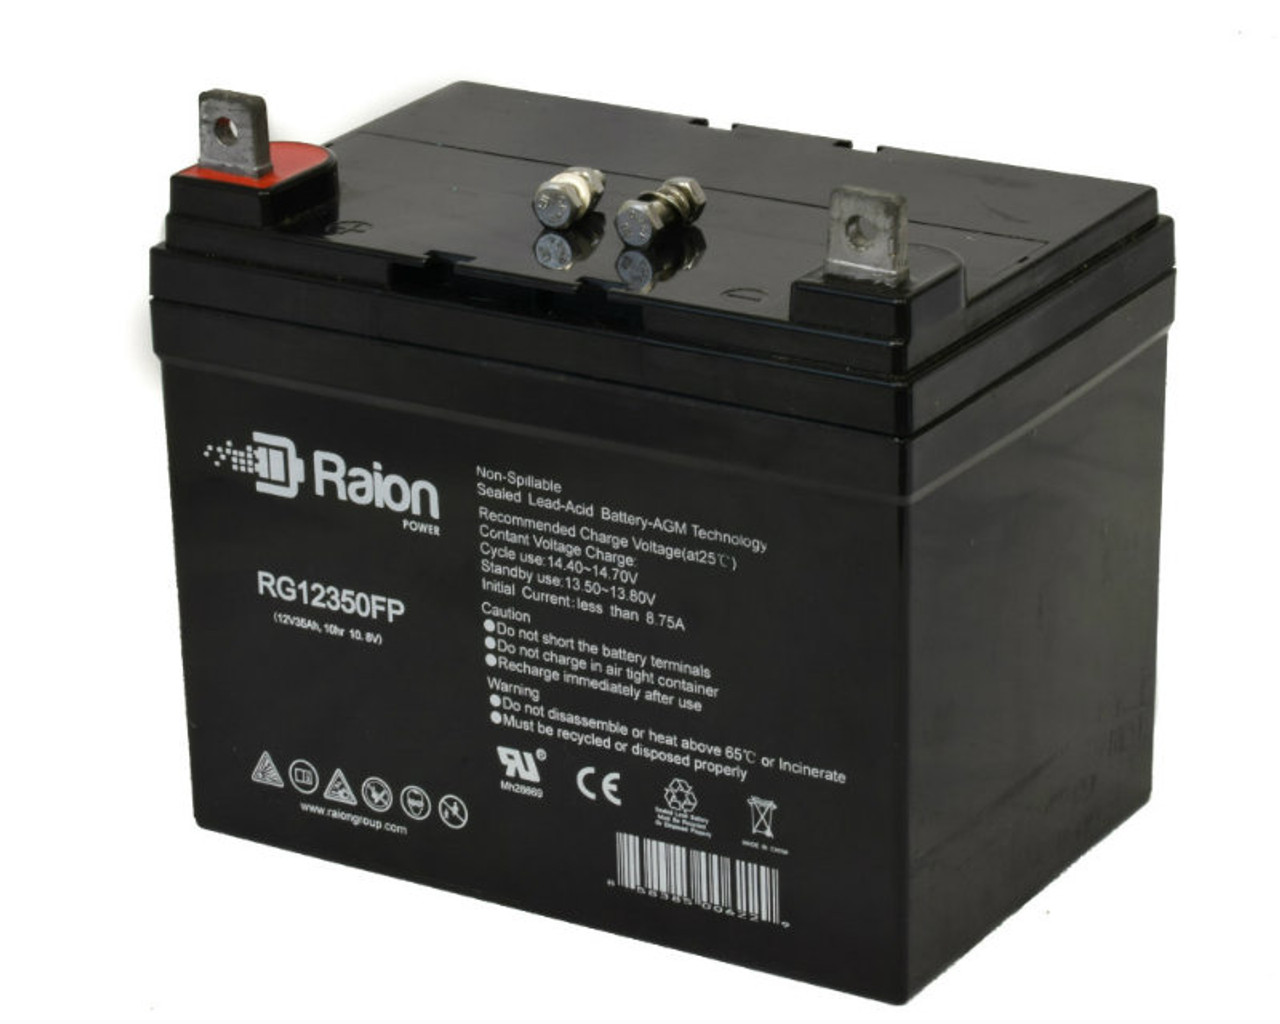 Raion Power Replacement 12V 35Ah RG12350FP Battery for Montgomery Ward 1300-1400 Series